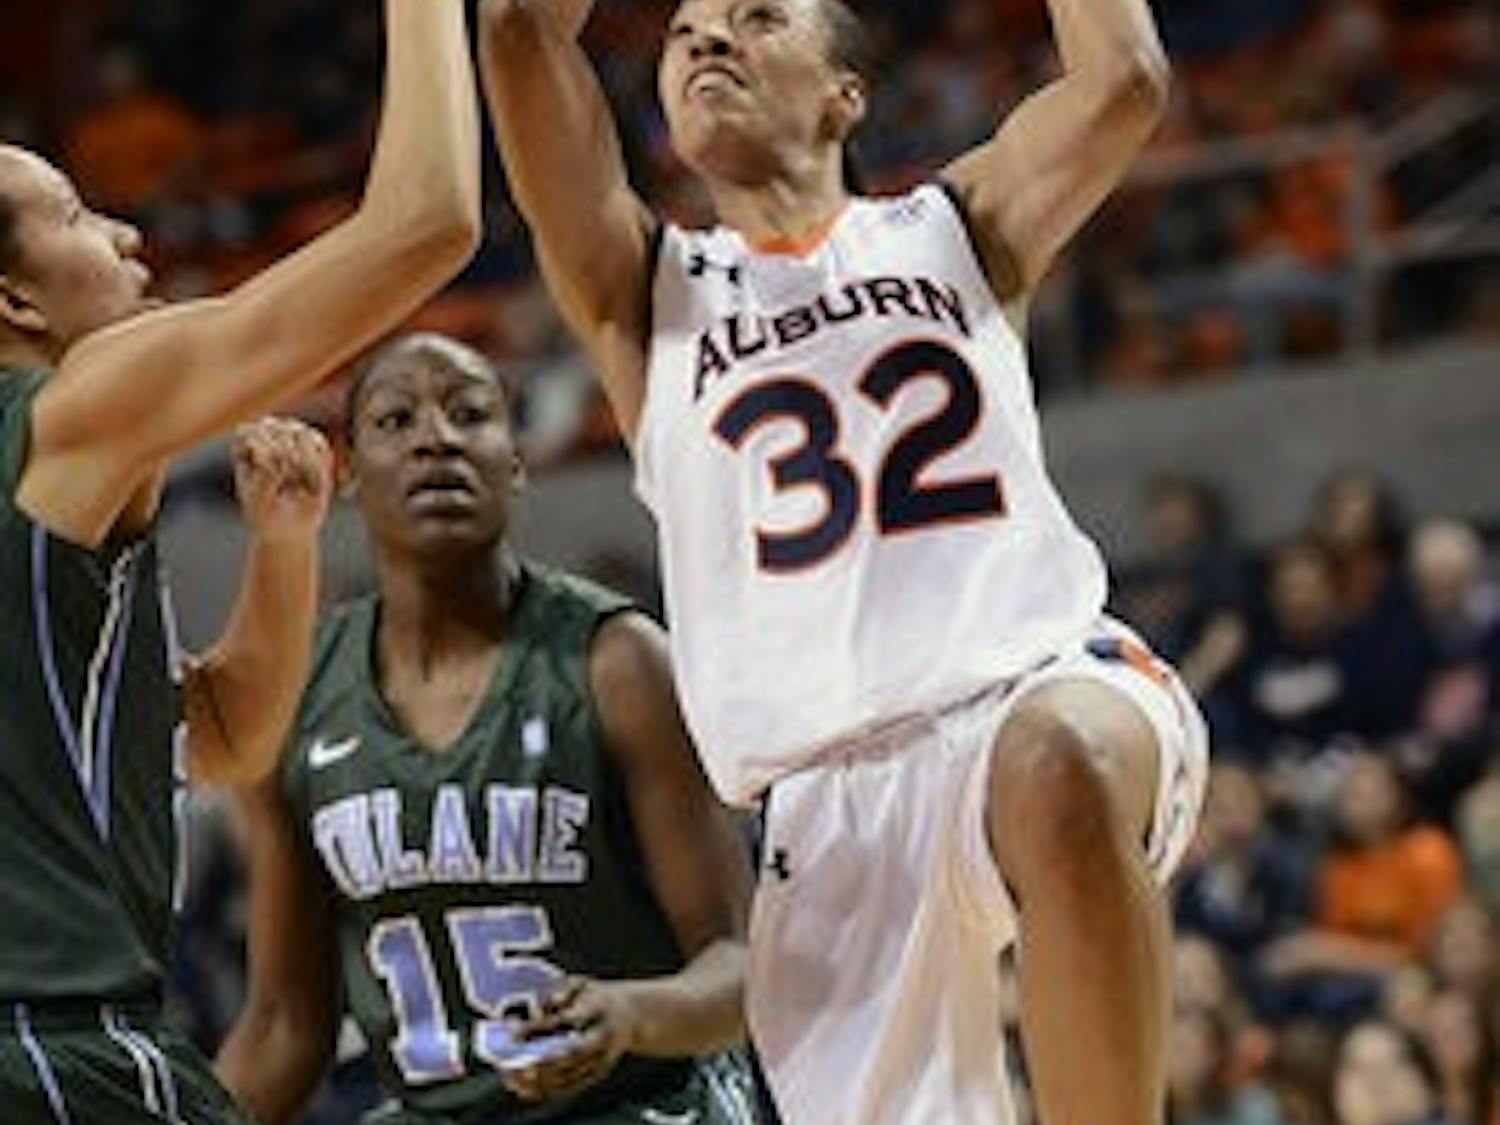 Tyrese Tanner in the first half.
Women's NIT Basketball, Tulane vs Auburn on March 27, in Auburn. (Courtesy of Todd Van Emst)